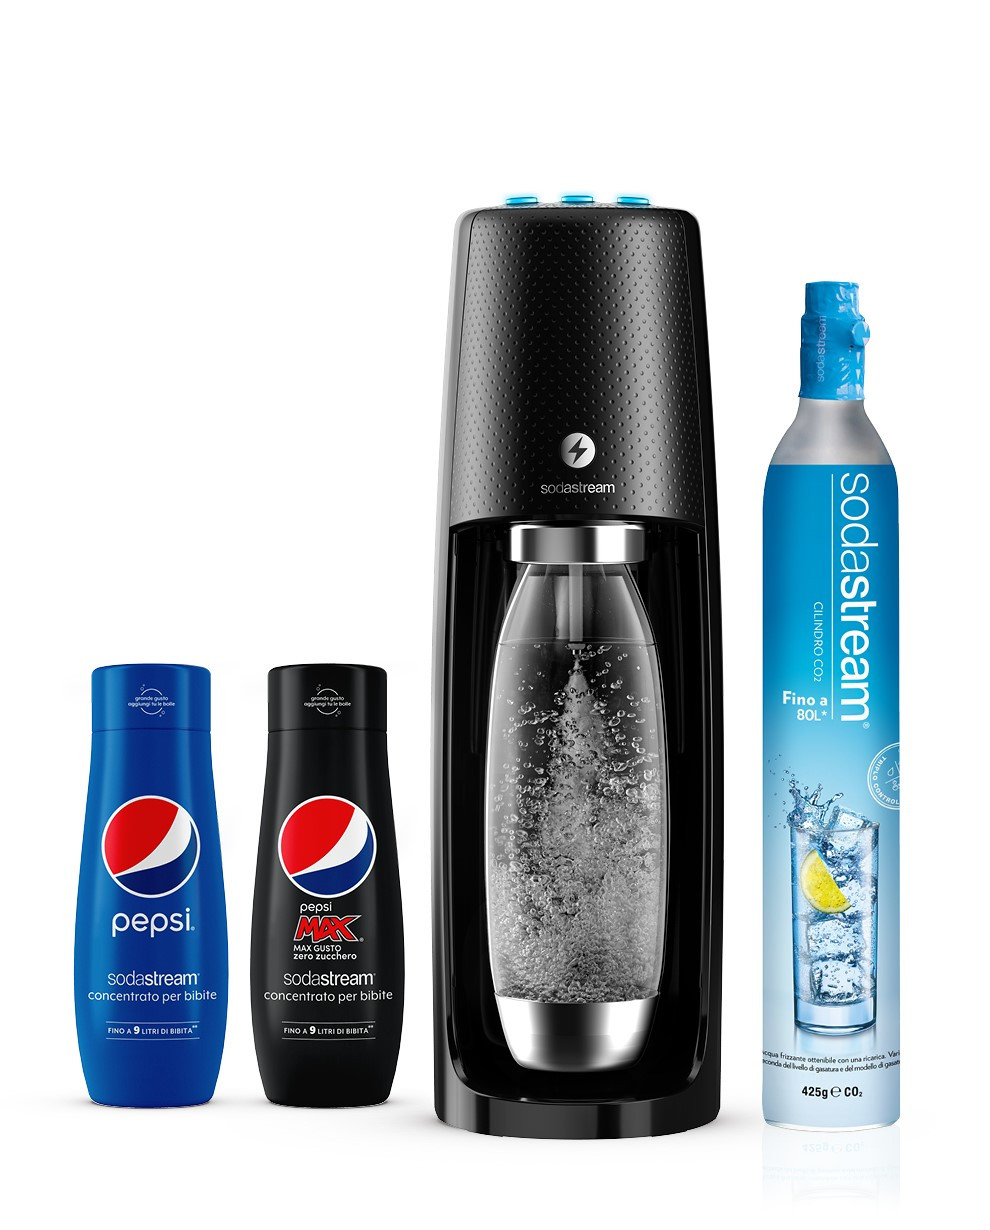 One Touch Pepsi Edition